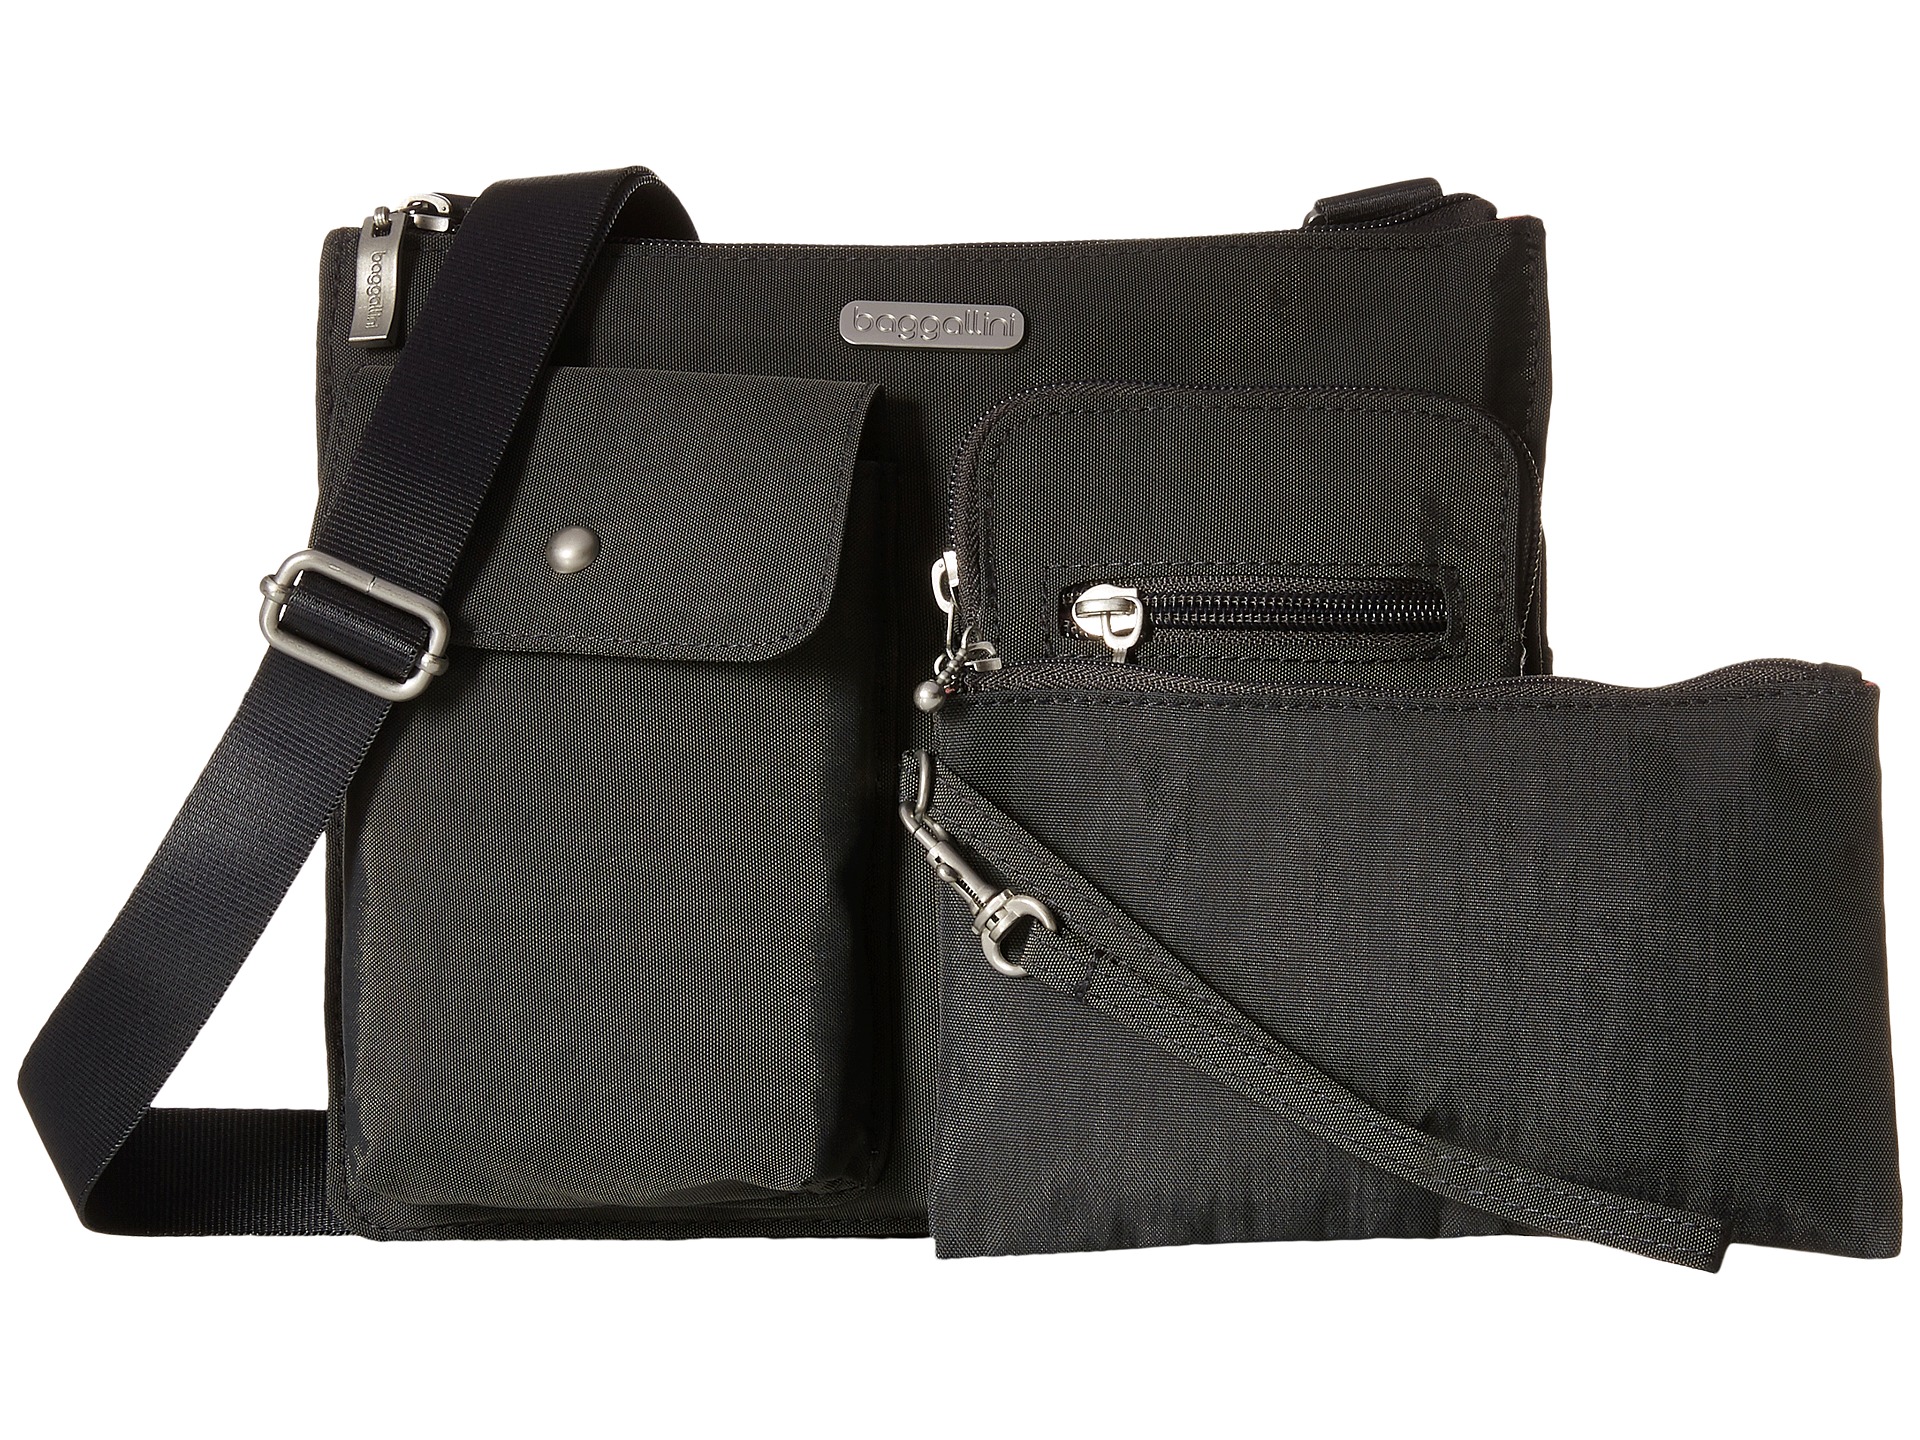 Baggallini Everything Bagg Charcoal - Zappos.com Free Shipping BOTH Ways